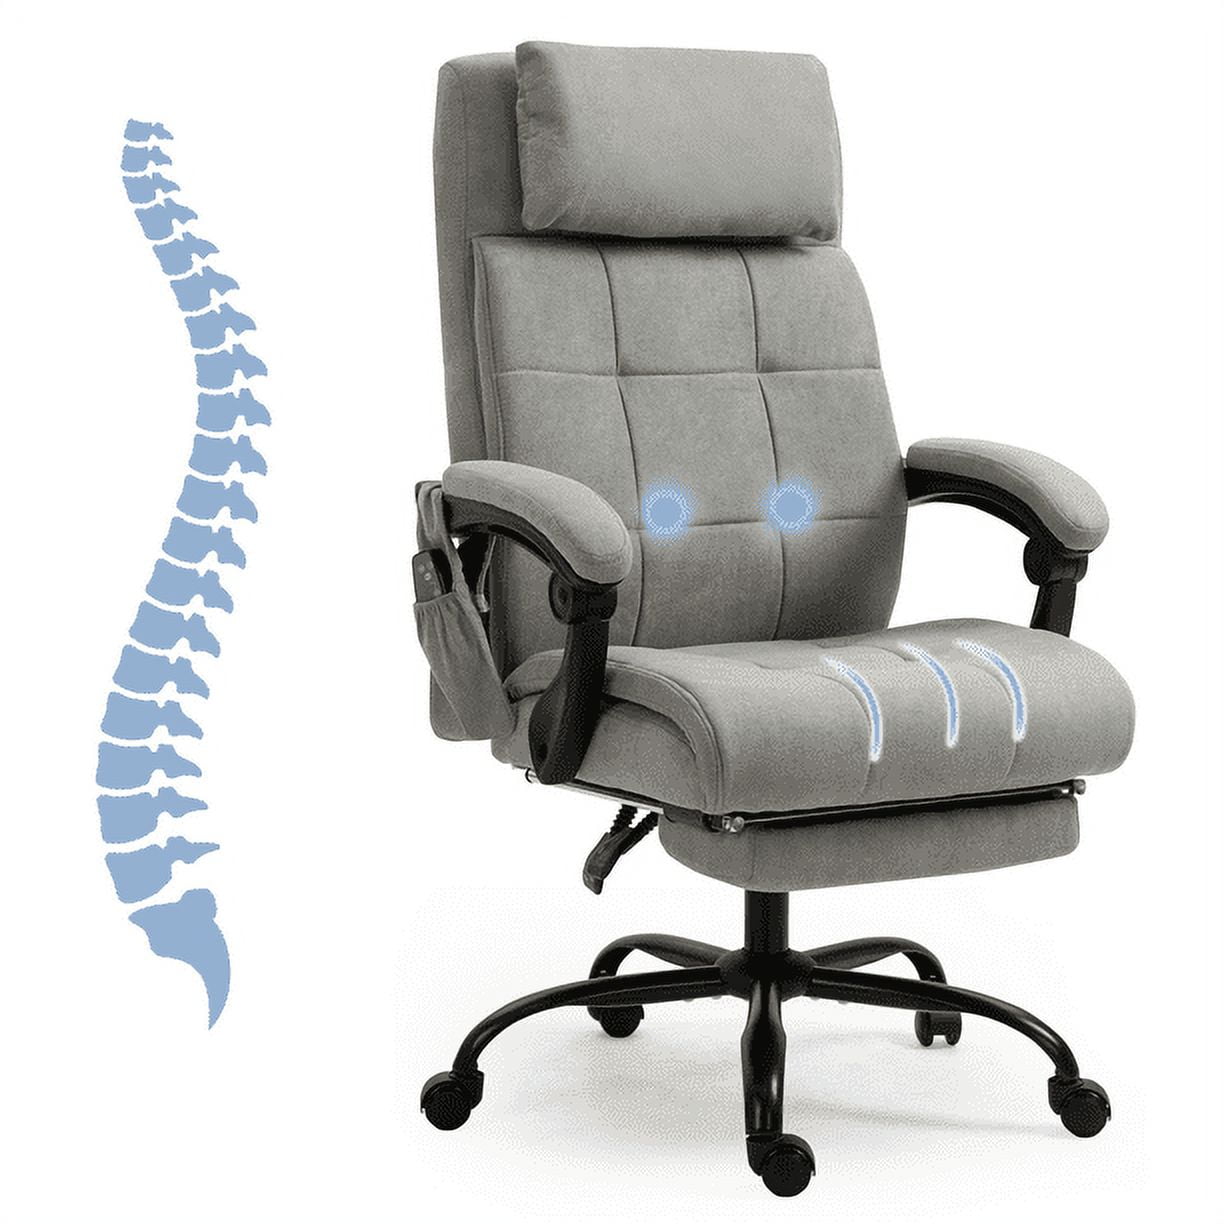 SEATZONE High Back Fabric Home Office Chair with Swivel, Executive Computer  Desk Adjustable Tilt and Flip-up Armrest, Comfy Thick Padding Ergonomic